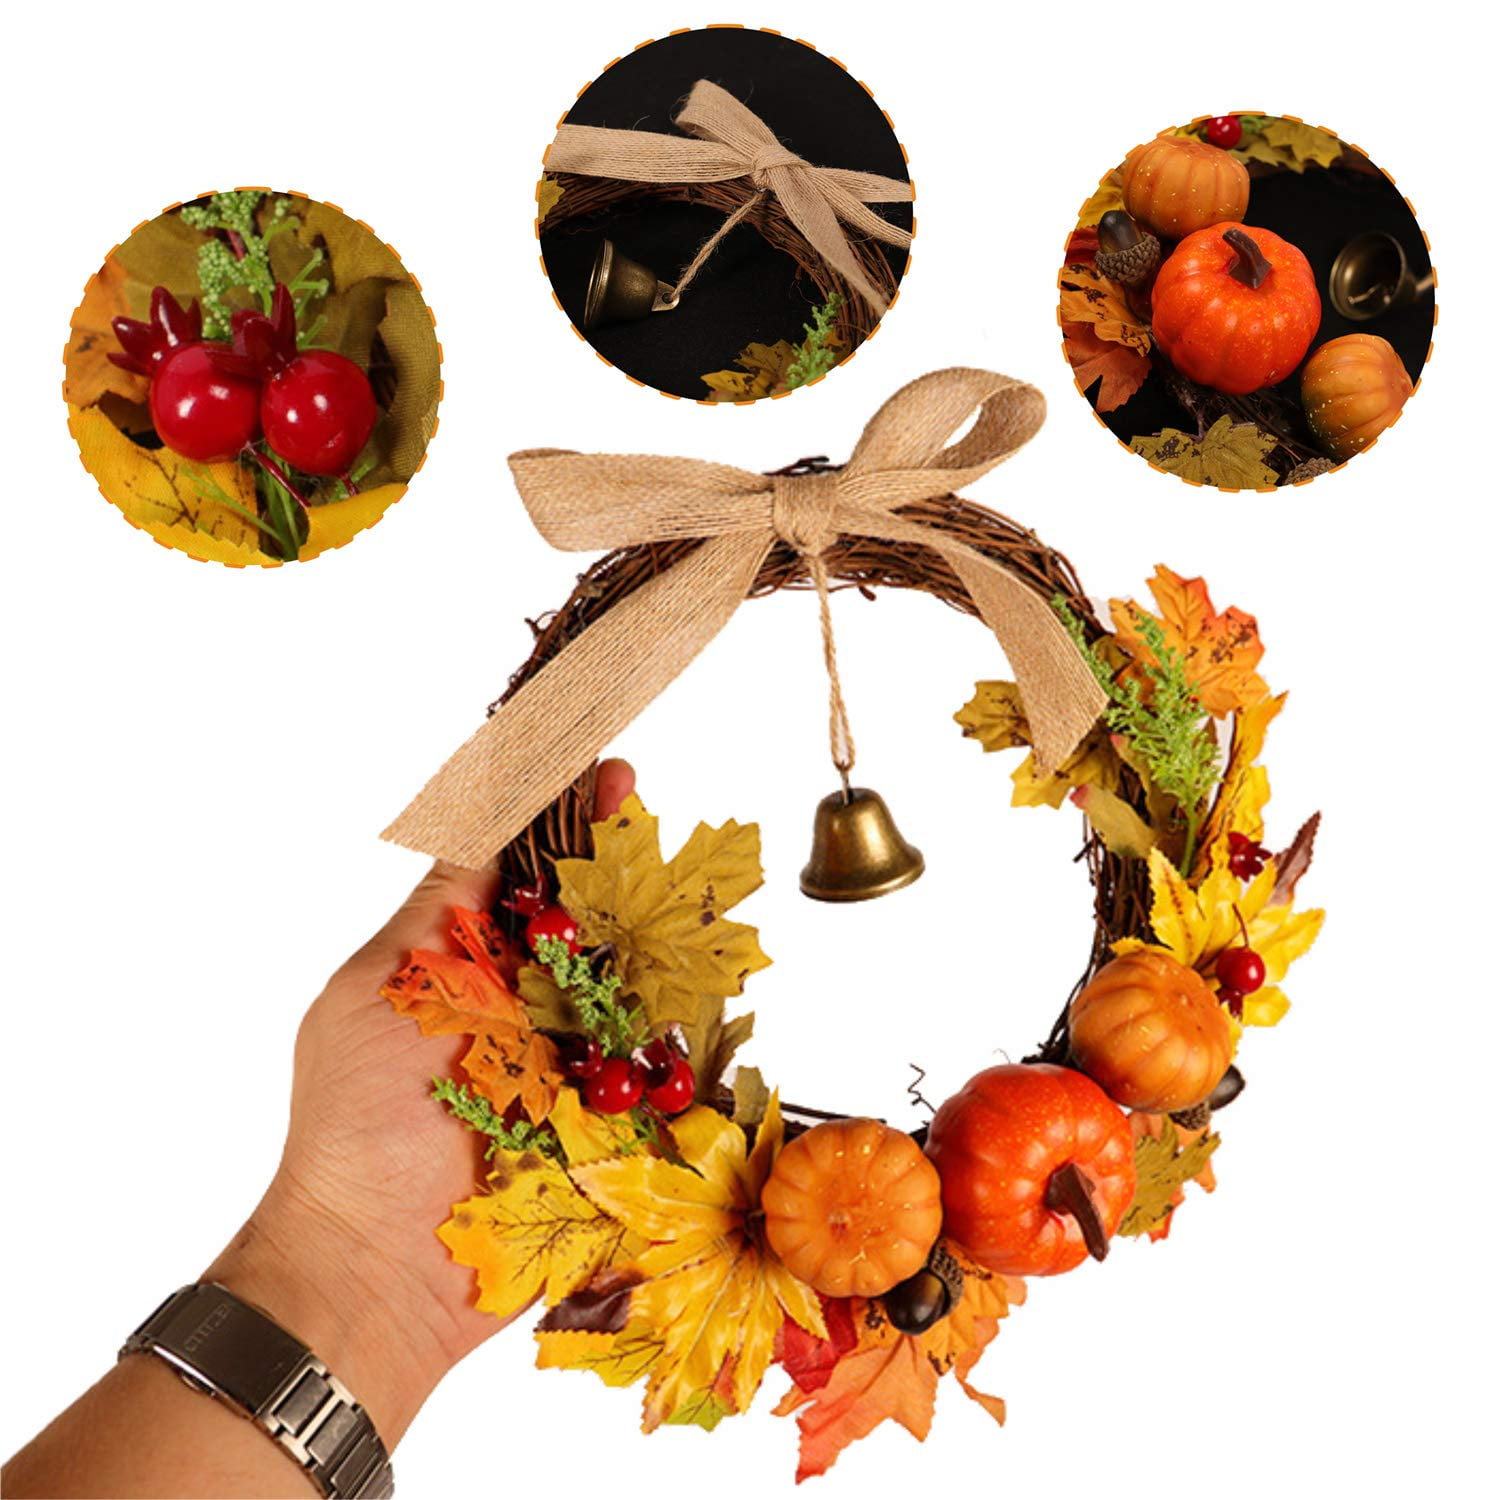 Autumn Berries and Maple Leaf Enhance Home Decor Emlyn Halloween Silk Fall Door Wreath 18-19 inch Handcrafted with Care,Year Round Wreath